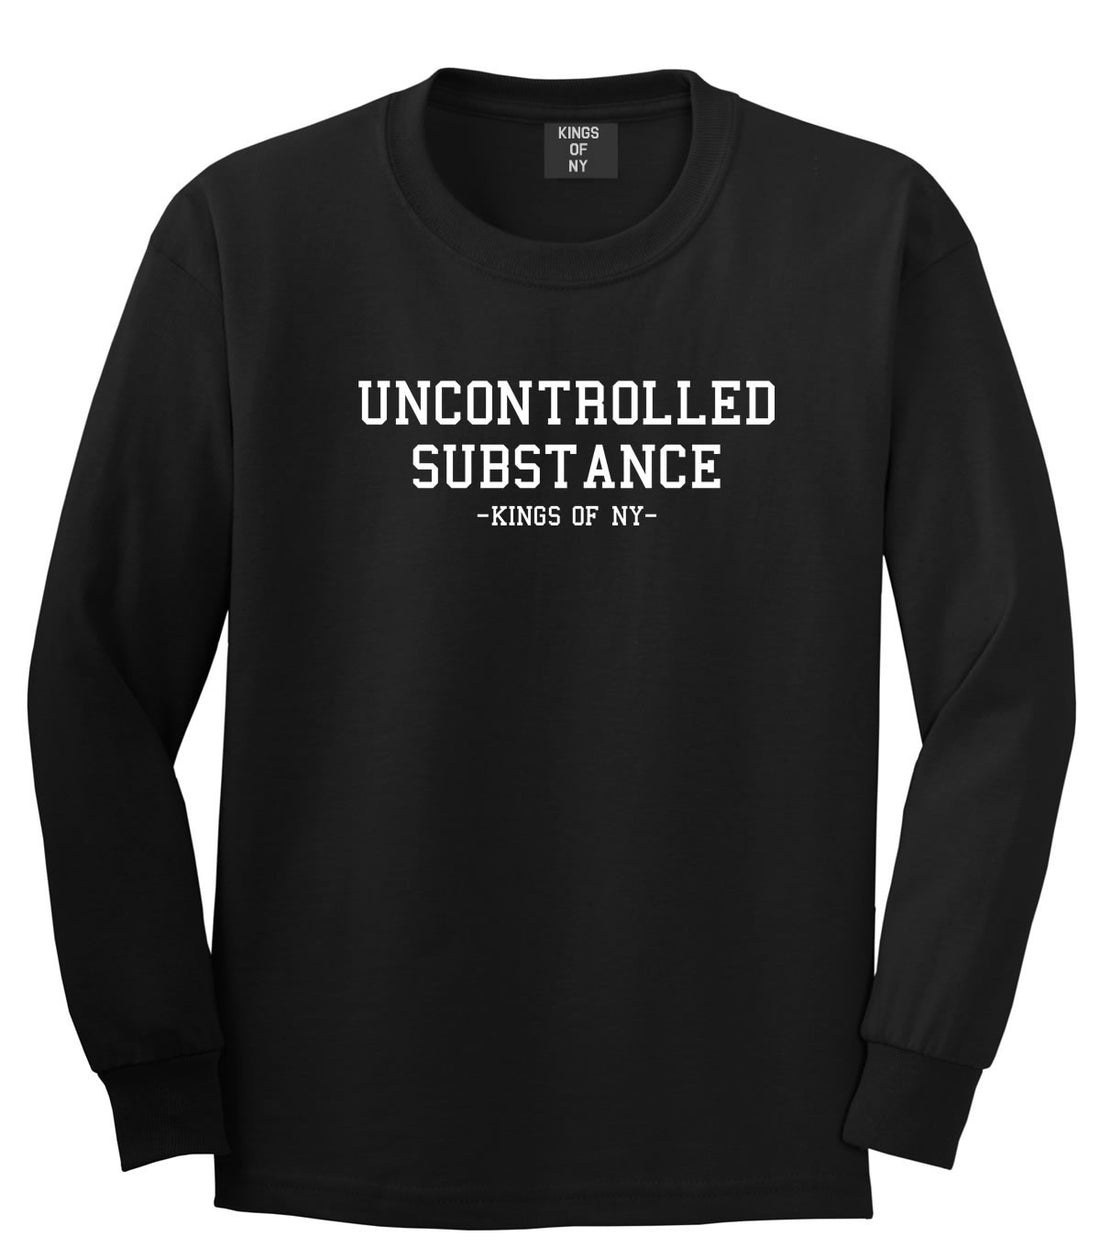 Uncontrolled Substance Long Sleeve T-Shirt in Black by Kings Of NY